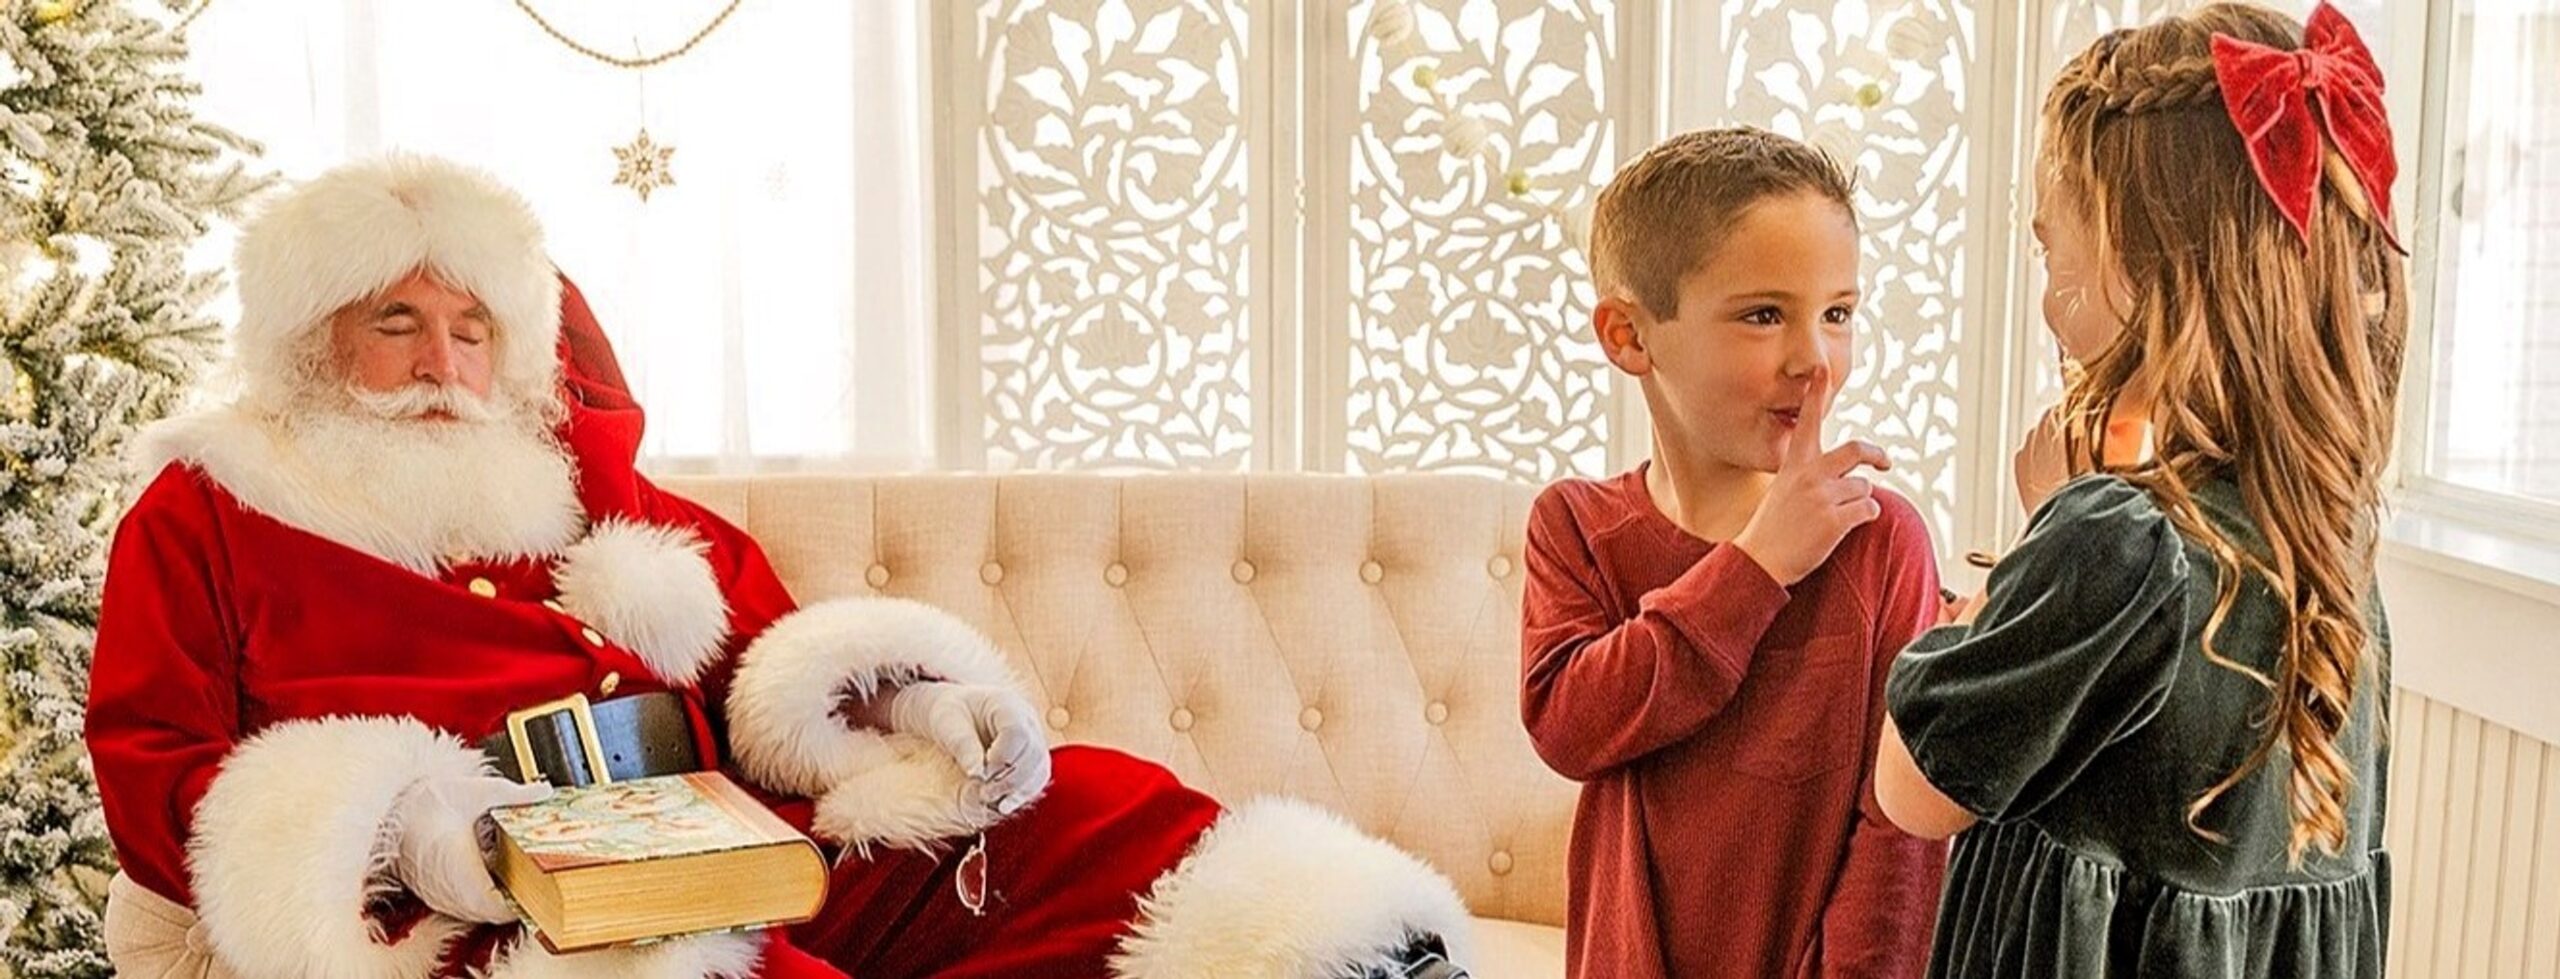 Santa Claus is resting with his eyes closes as two children look at him. The boy is motioning for his sister to be quiet.